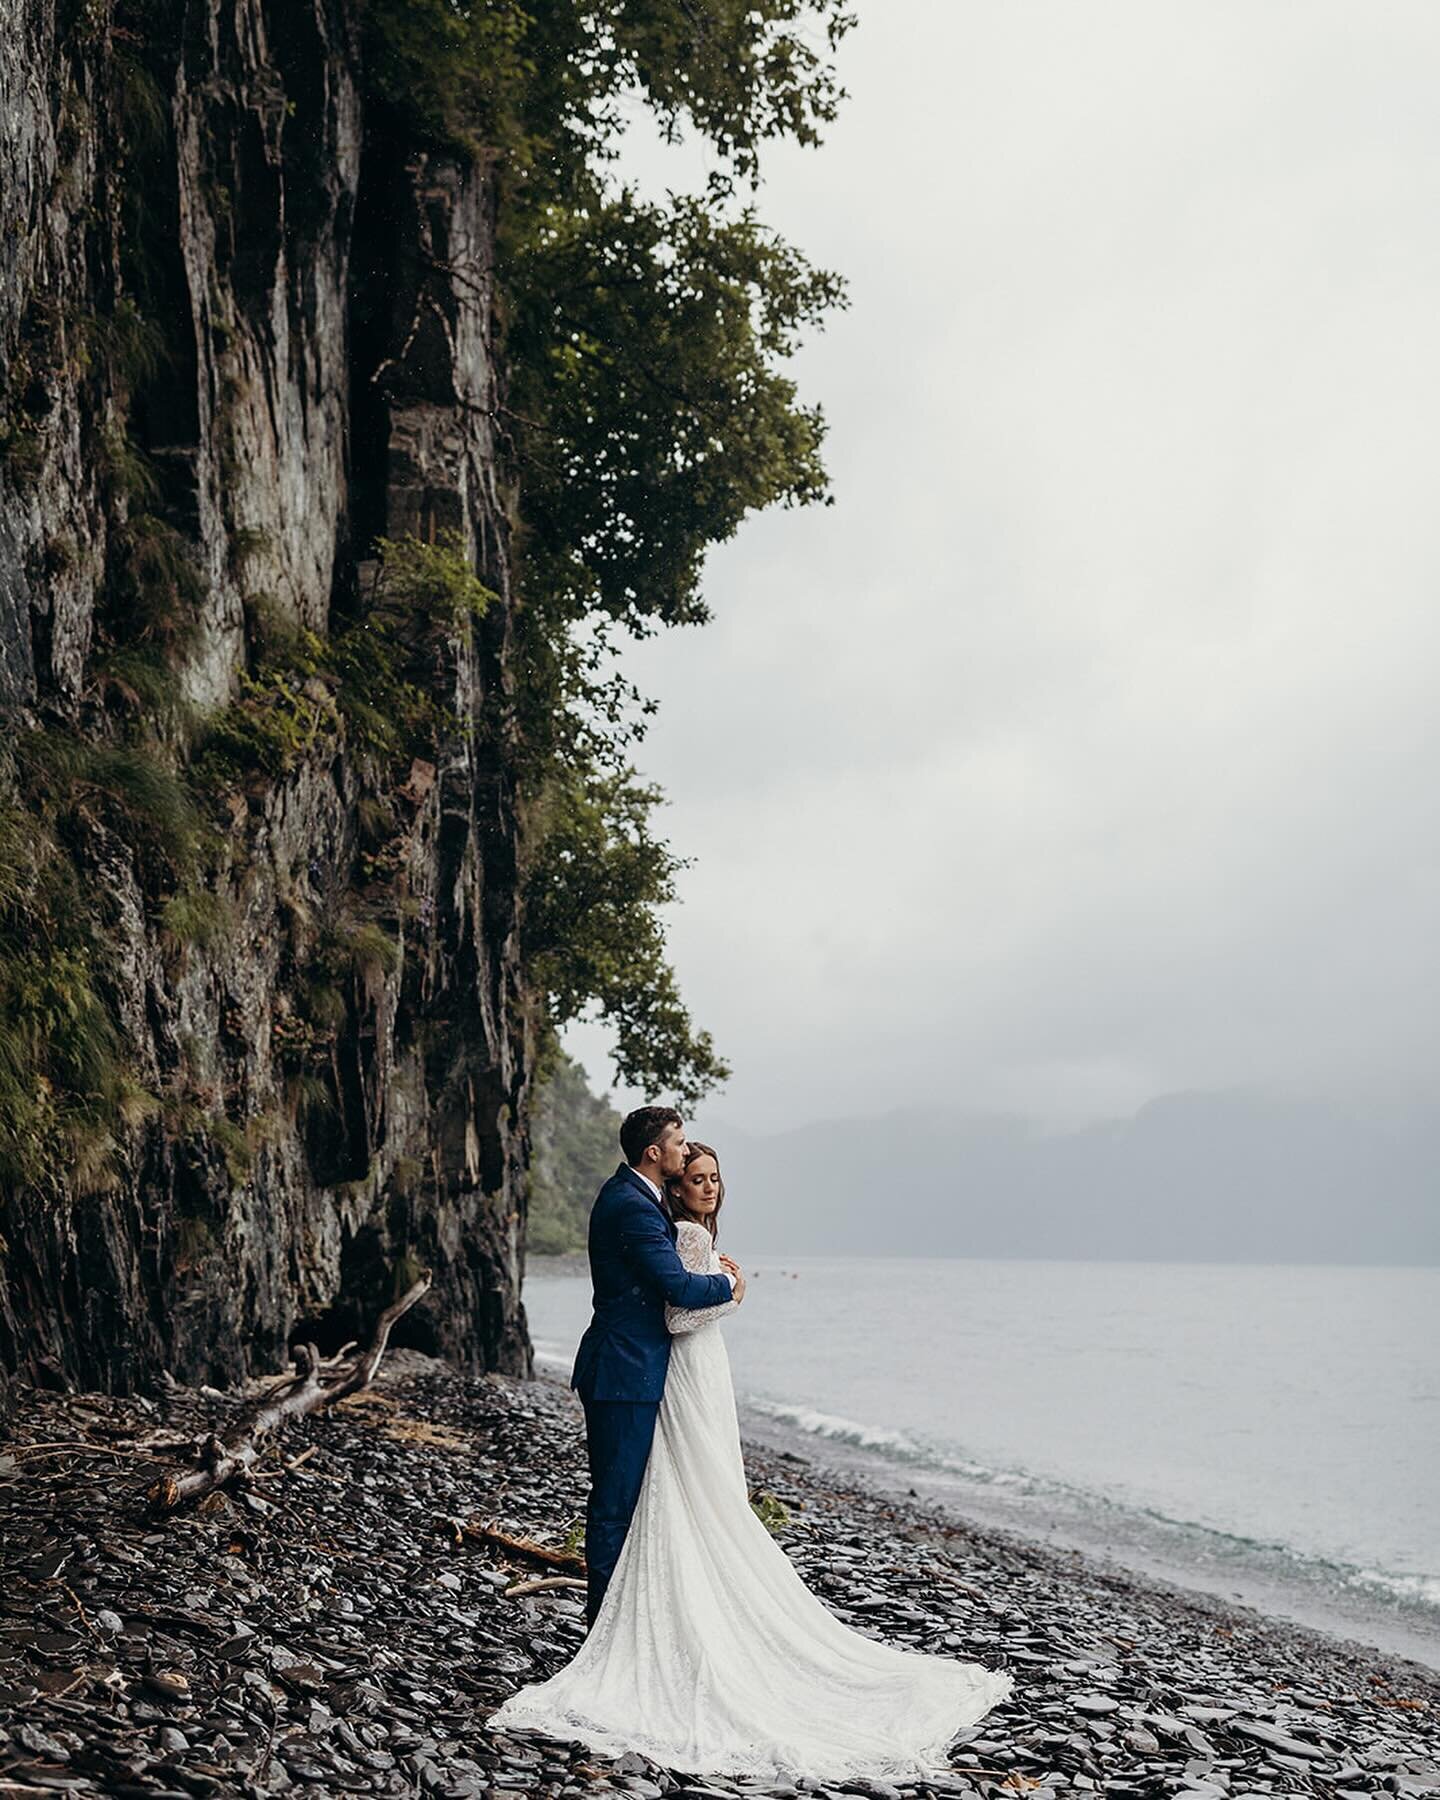 Throwing it back to where the giveaway magic began for Alaska Wild Hearts Events! ✨ I&rsquo;m reminiscing about the breathtaking elopement we celebrated in Kenai Fjords back in 2021. Could your love story be next? 💍 Enter our Giveaway and get ready 